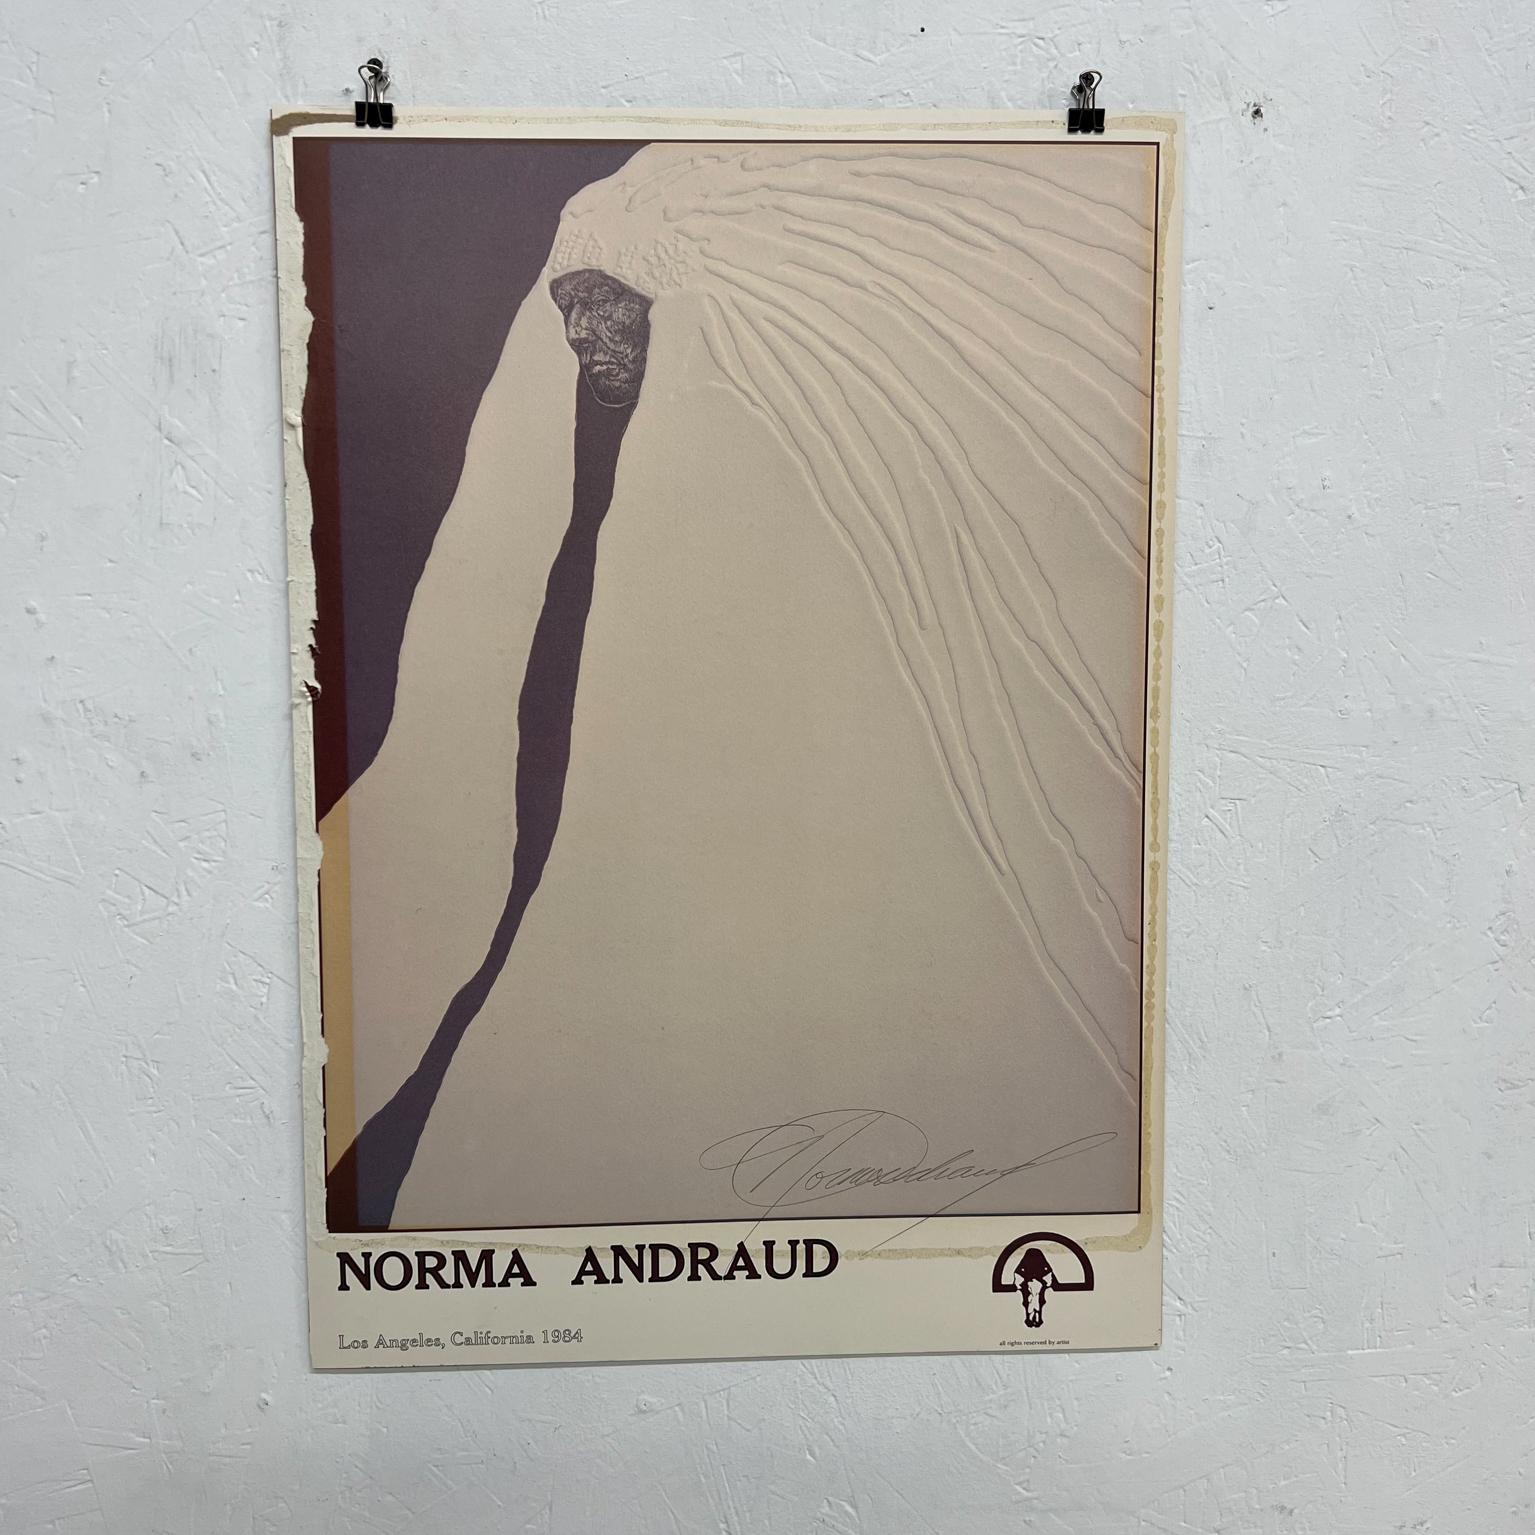 1984 Norma Andraud Modern Art Los Angeles CA many feathers embossed poster 
Signature
19 x 27
Original unrestored vintage condition.
See images provided.
 